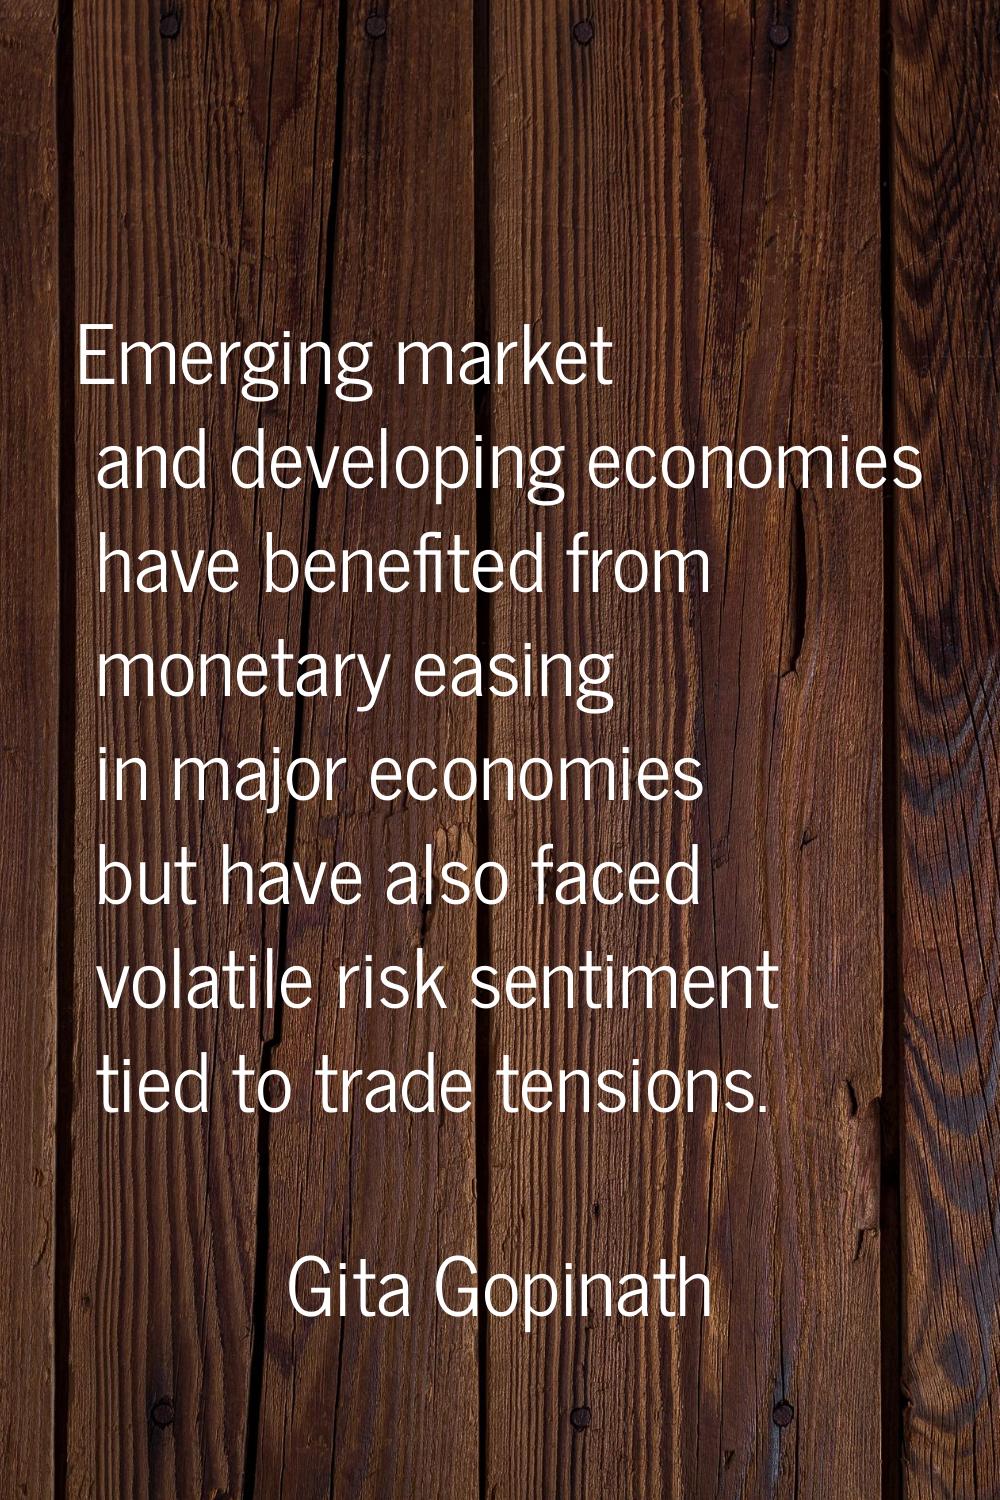 Emerging market and developing economies have benefited from monetary easing in major economies but